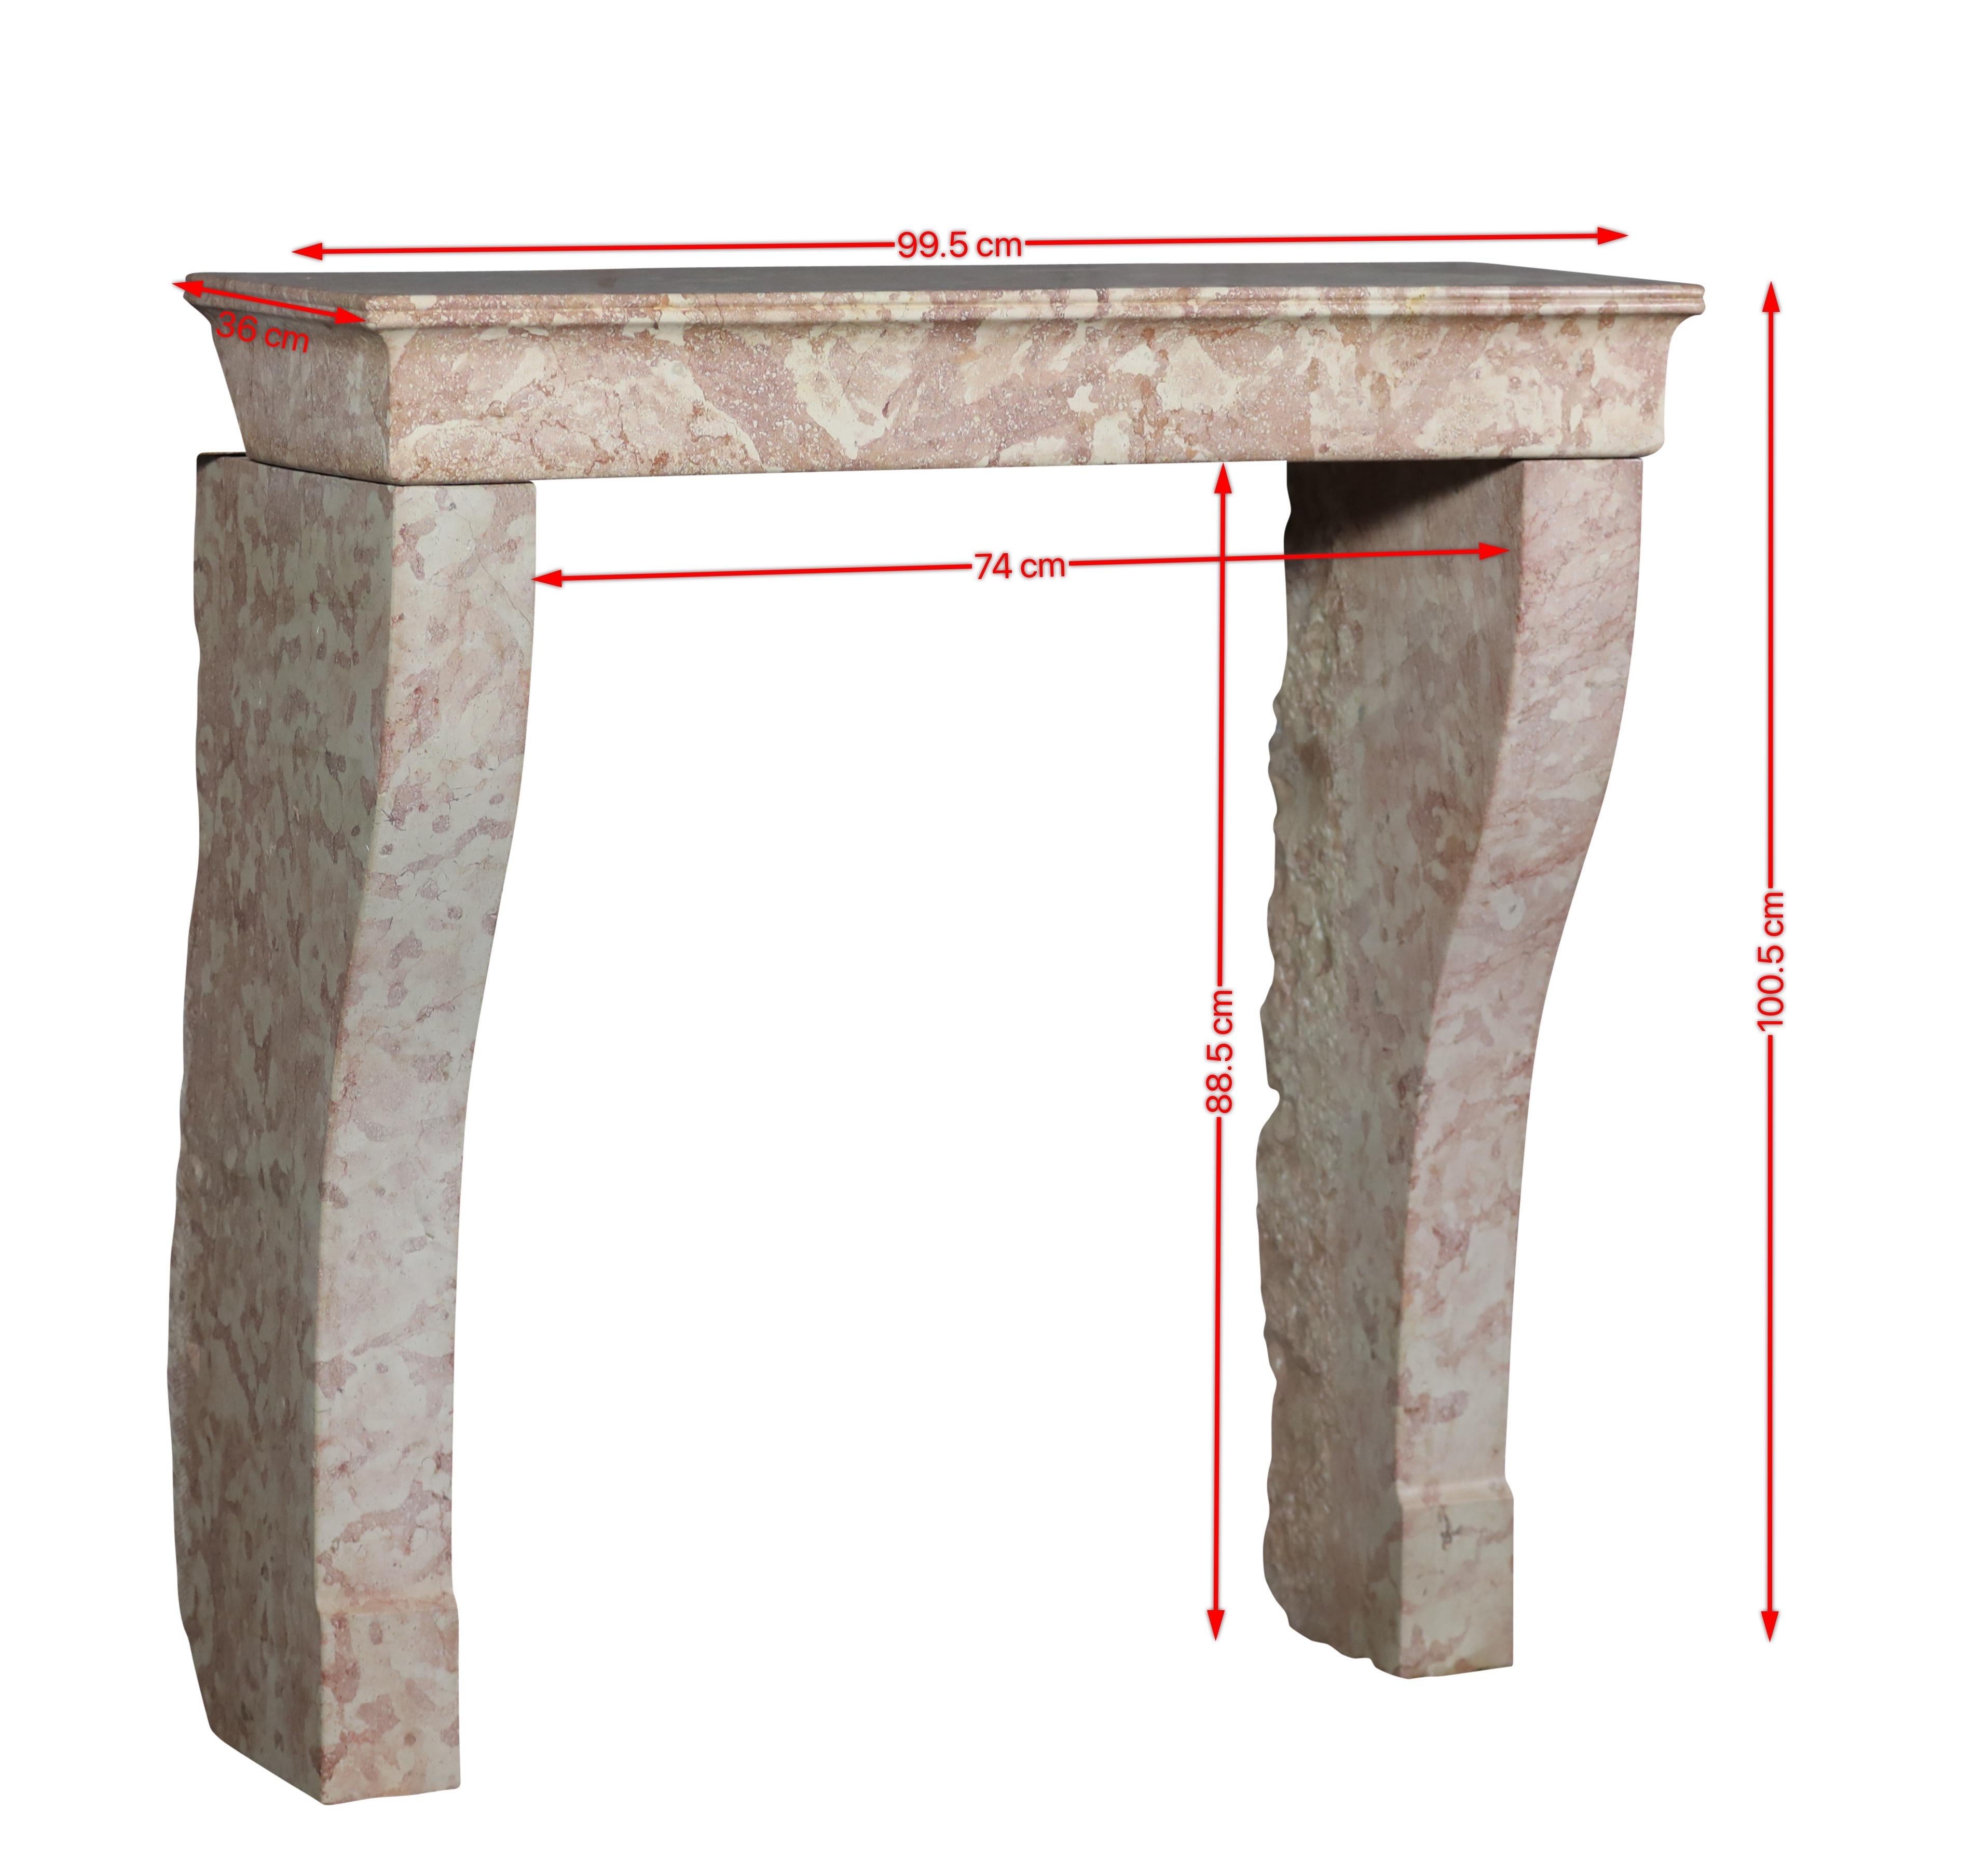 A fine marriage of antique French rustic fireplace surround elements in a Burgundian hard limestone.
A 17th century period mantle piece which works perfect for a timeless country interior concept.
Measures:
111 cm Exterior Width 43,70 Inch
107 cm